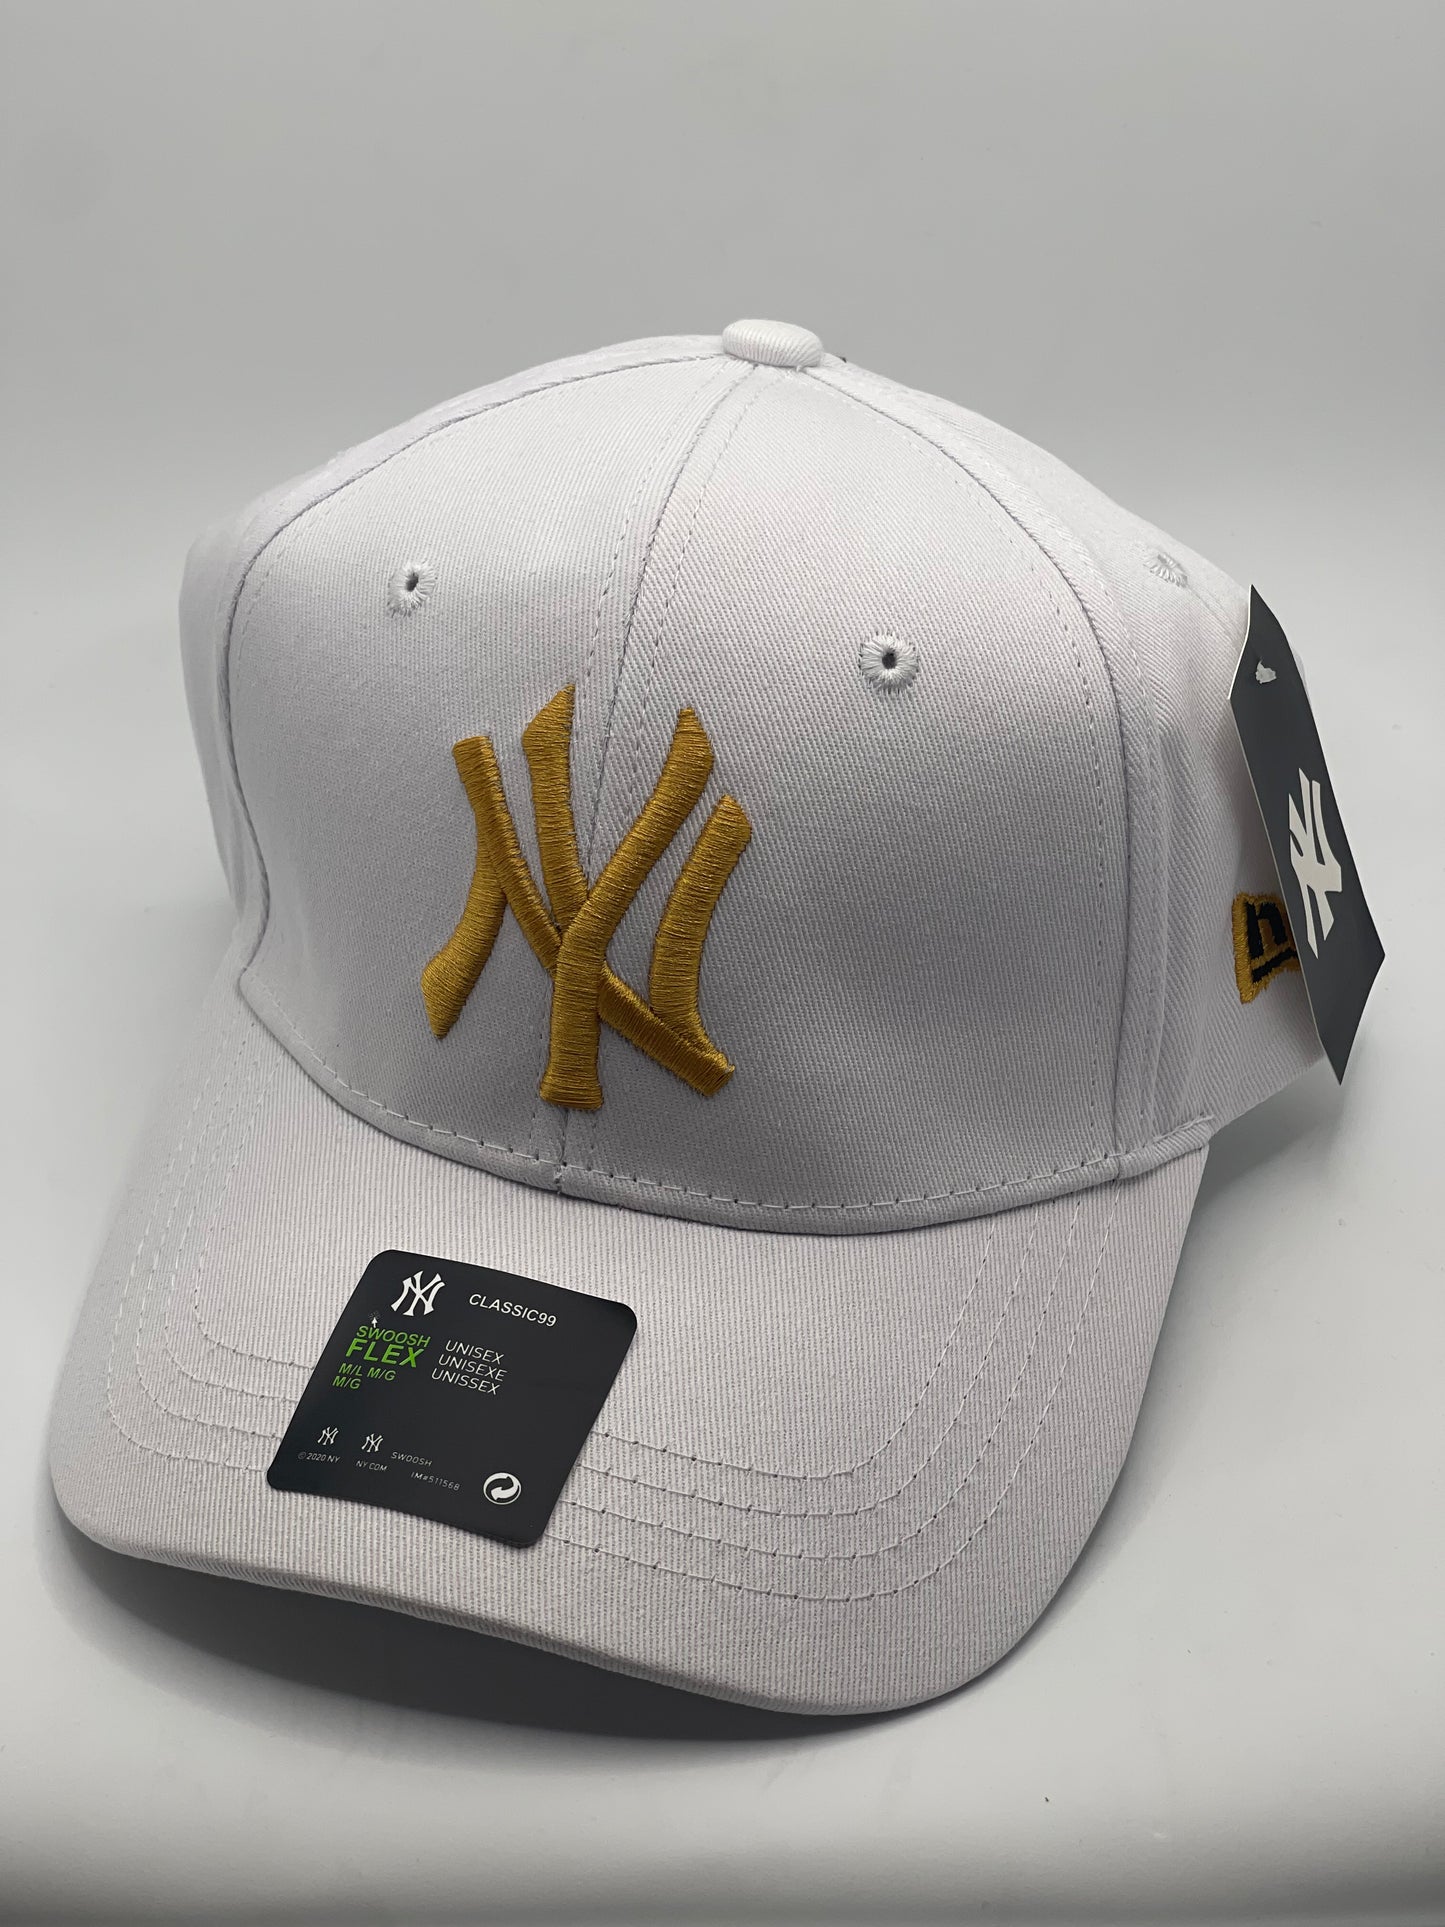 Classic99 Ny hat SWOOSH FLEX UNISEX - Get the Look You Crave | Tophats –